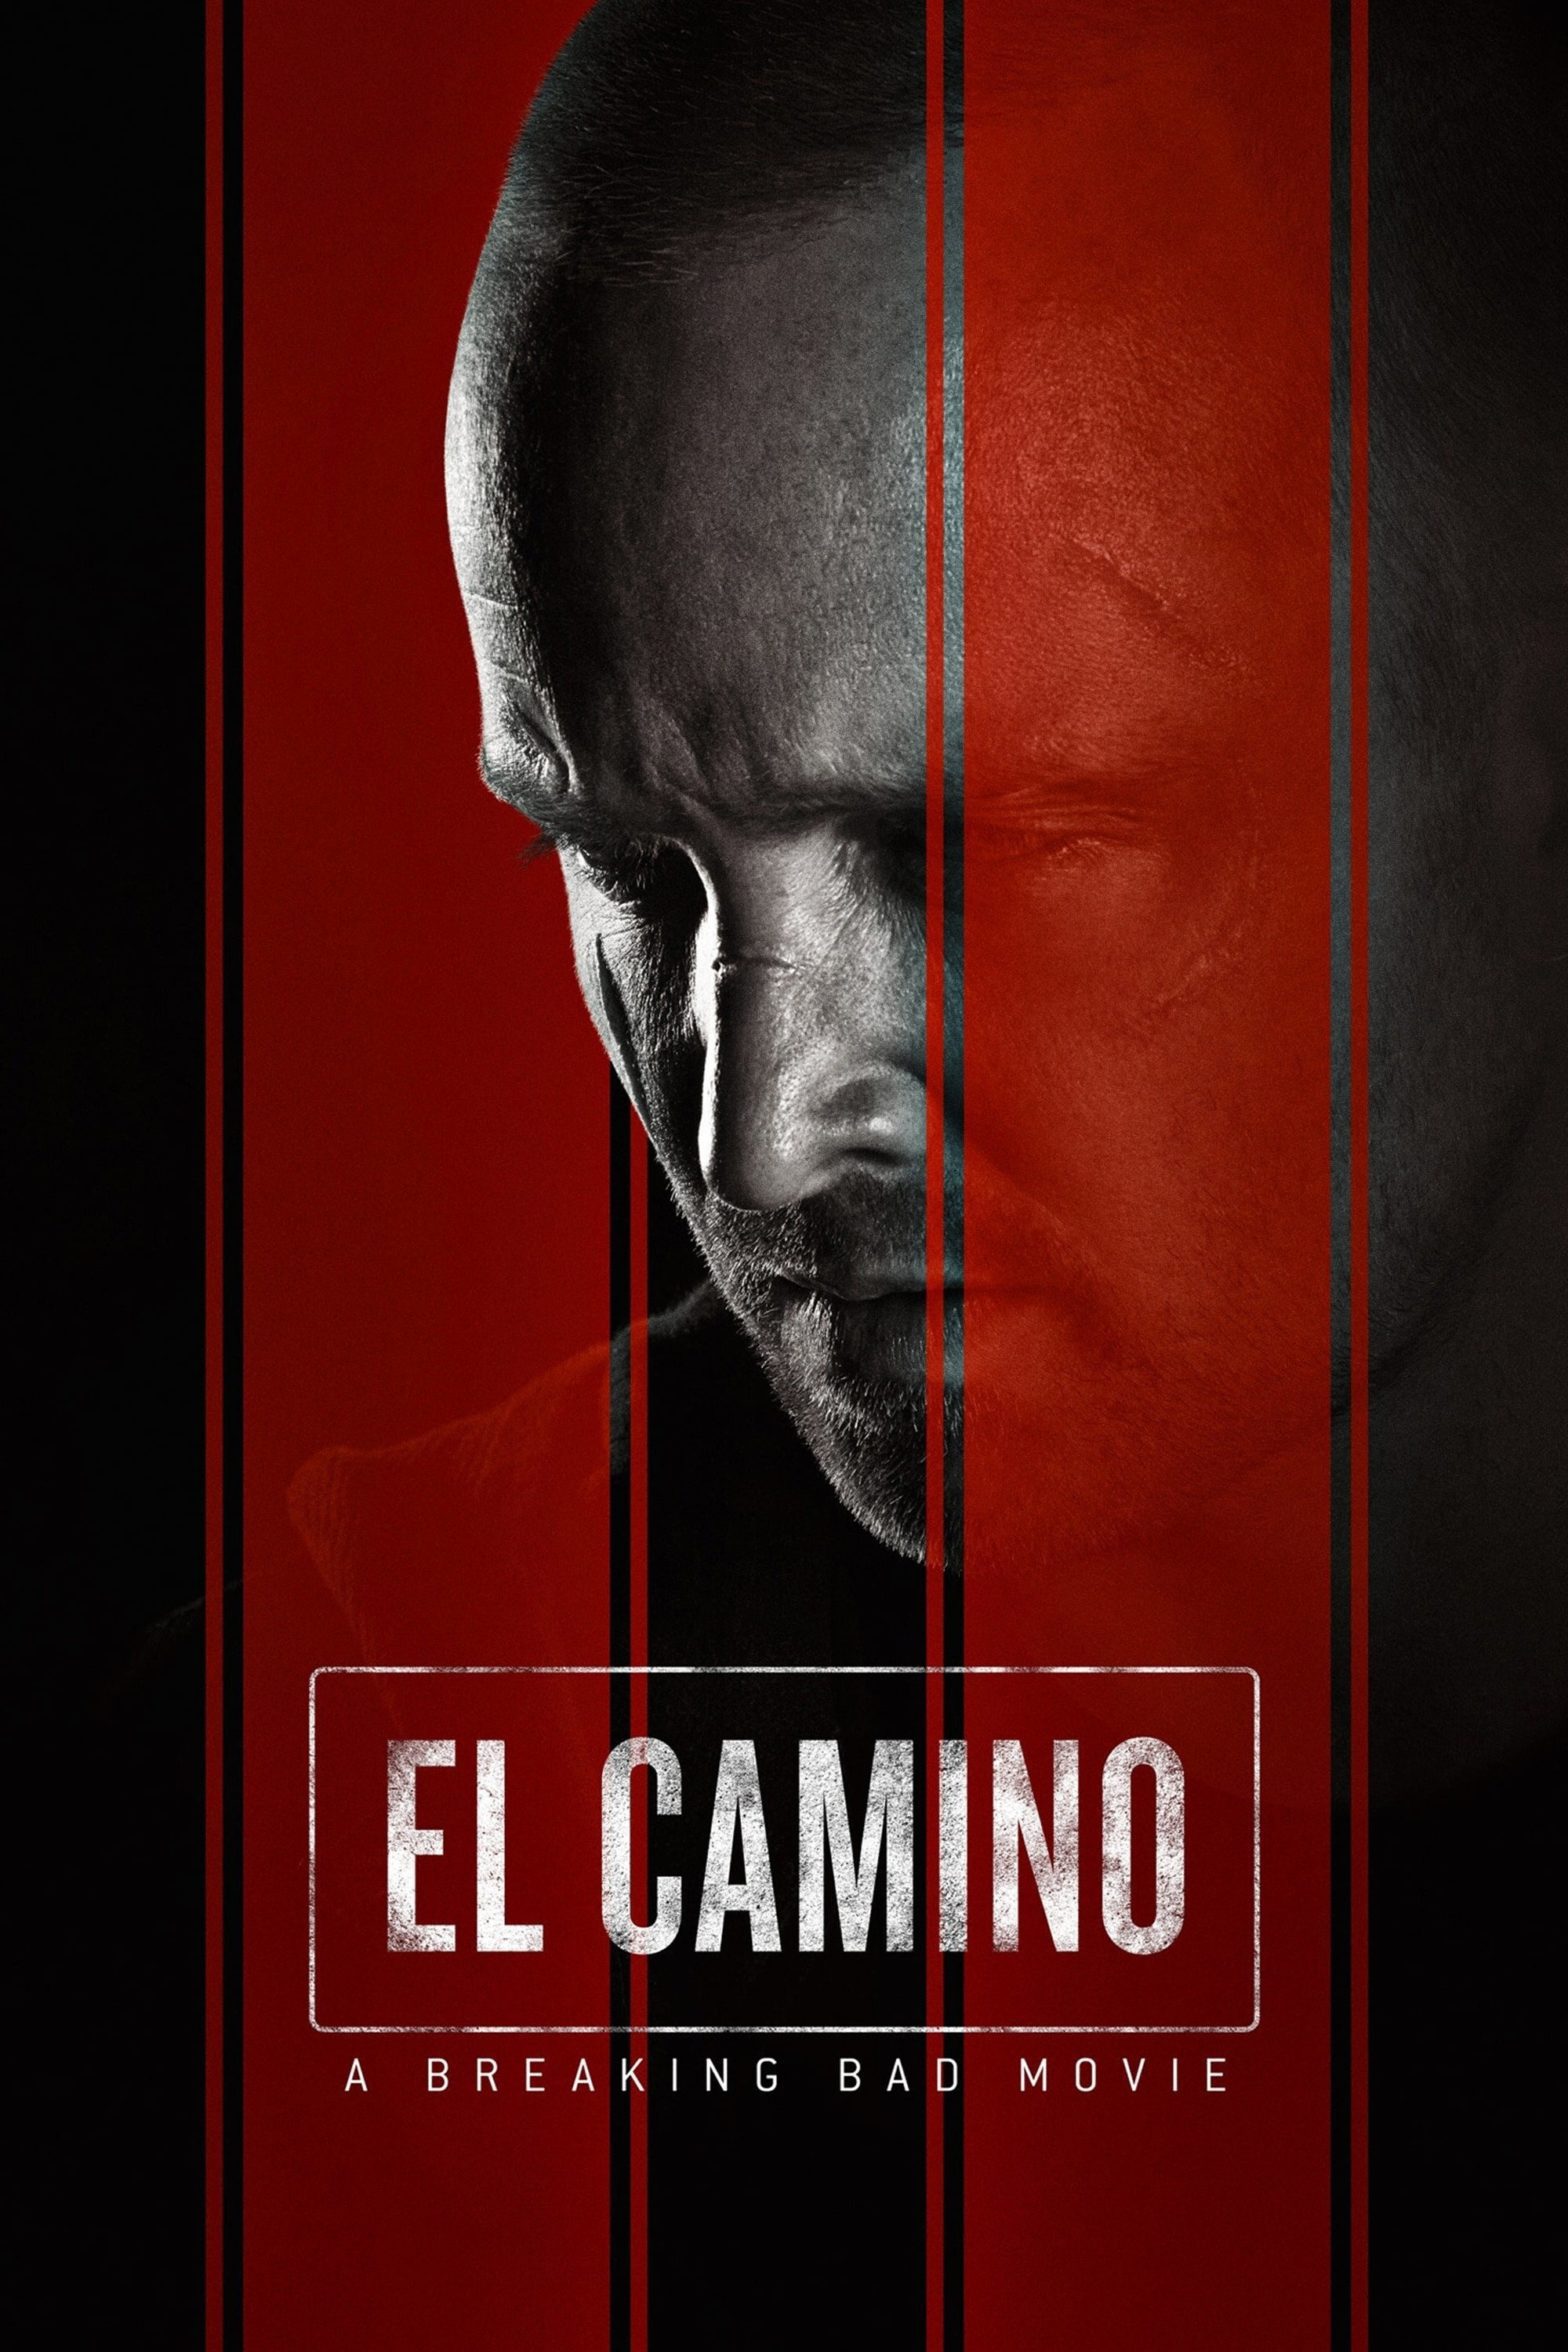 Poster for the movie "El Camino: A Breaking Bad Movie"